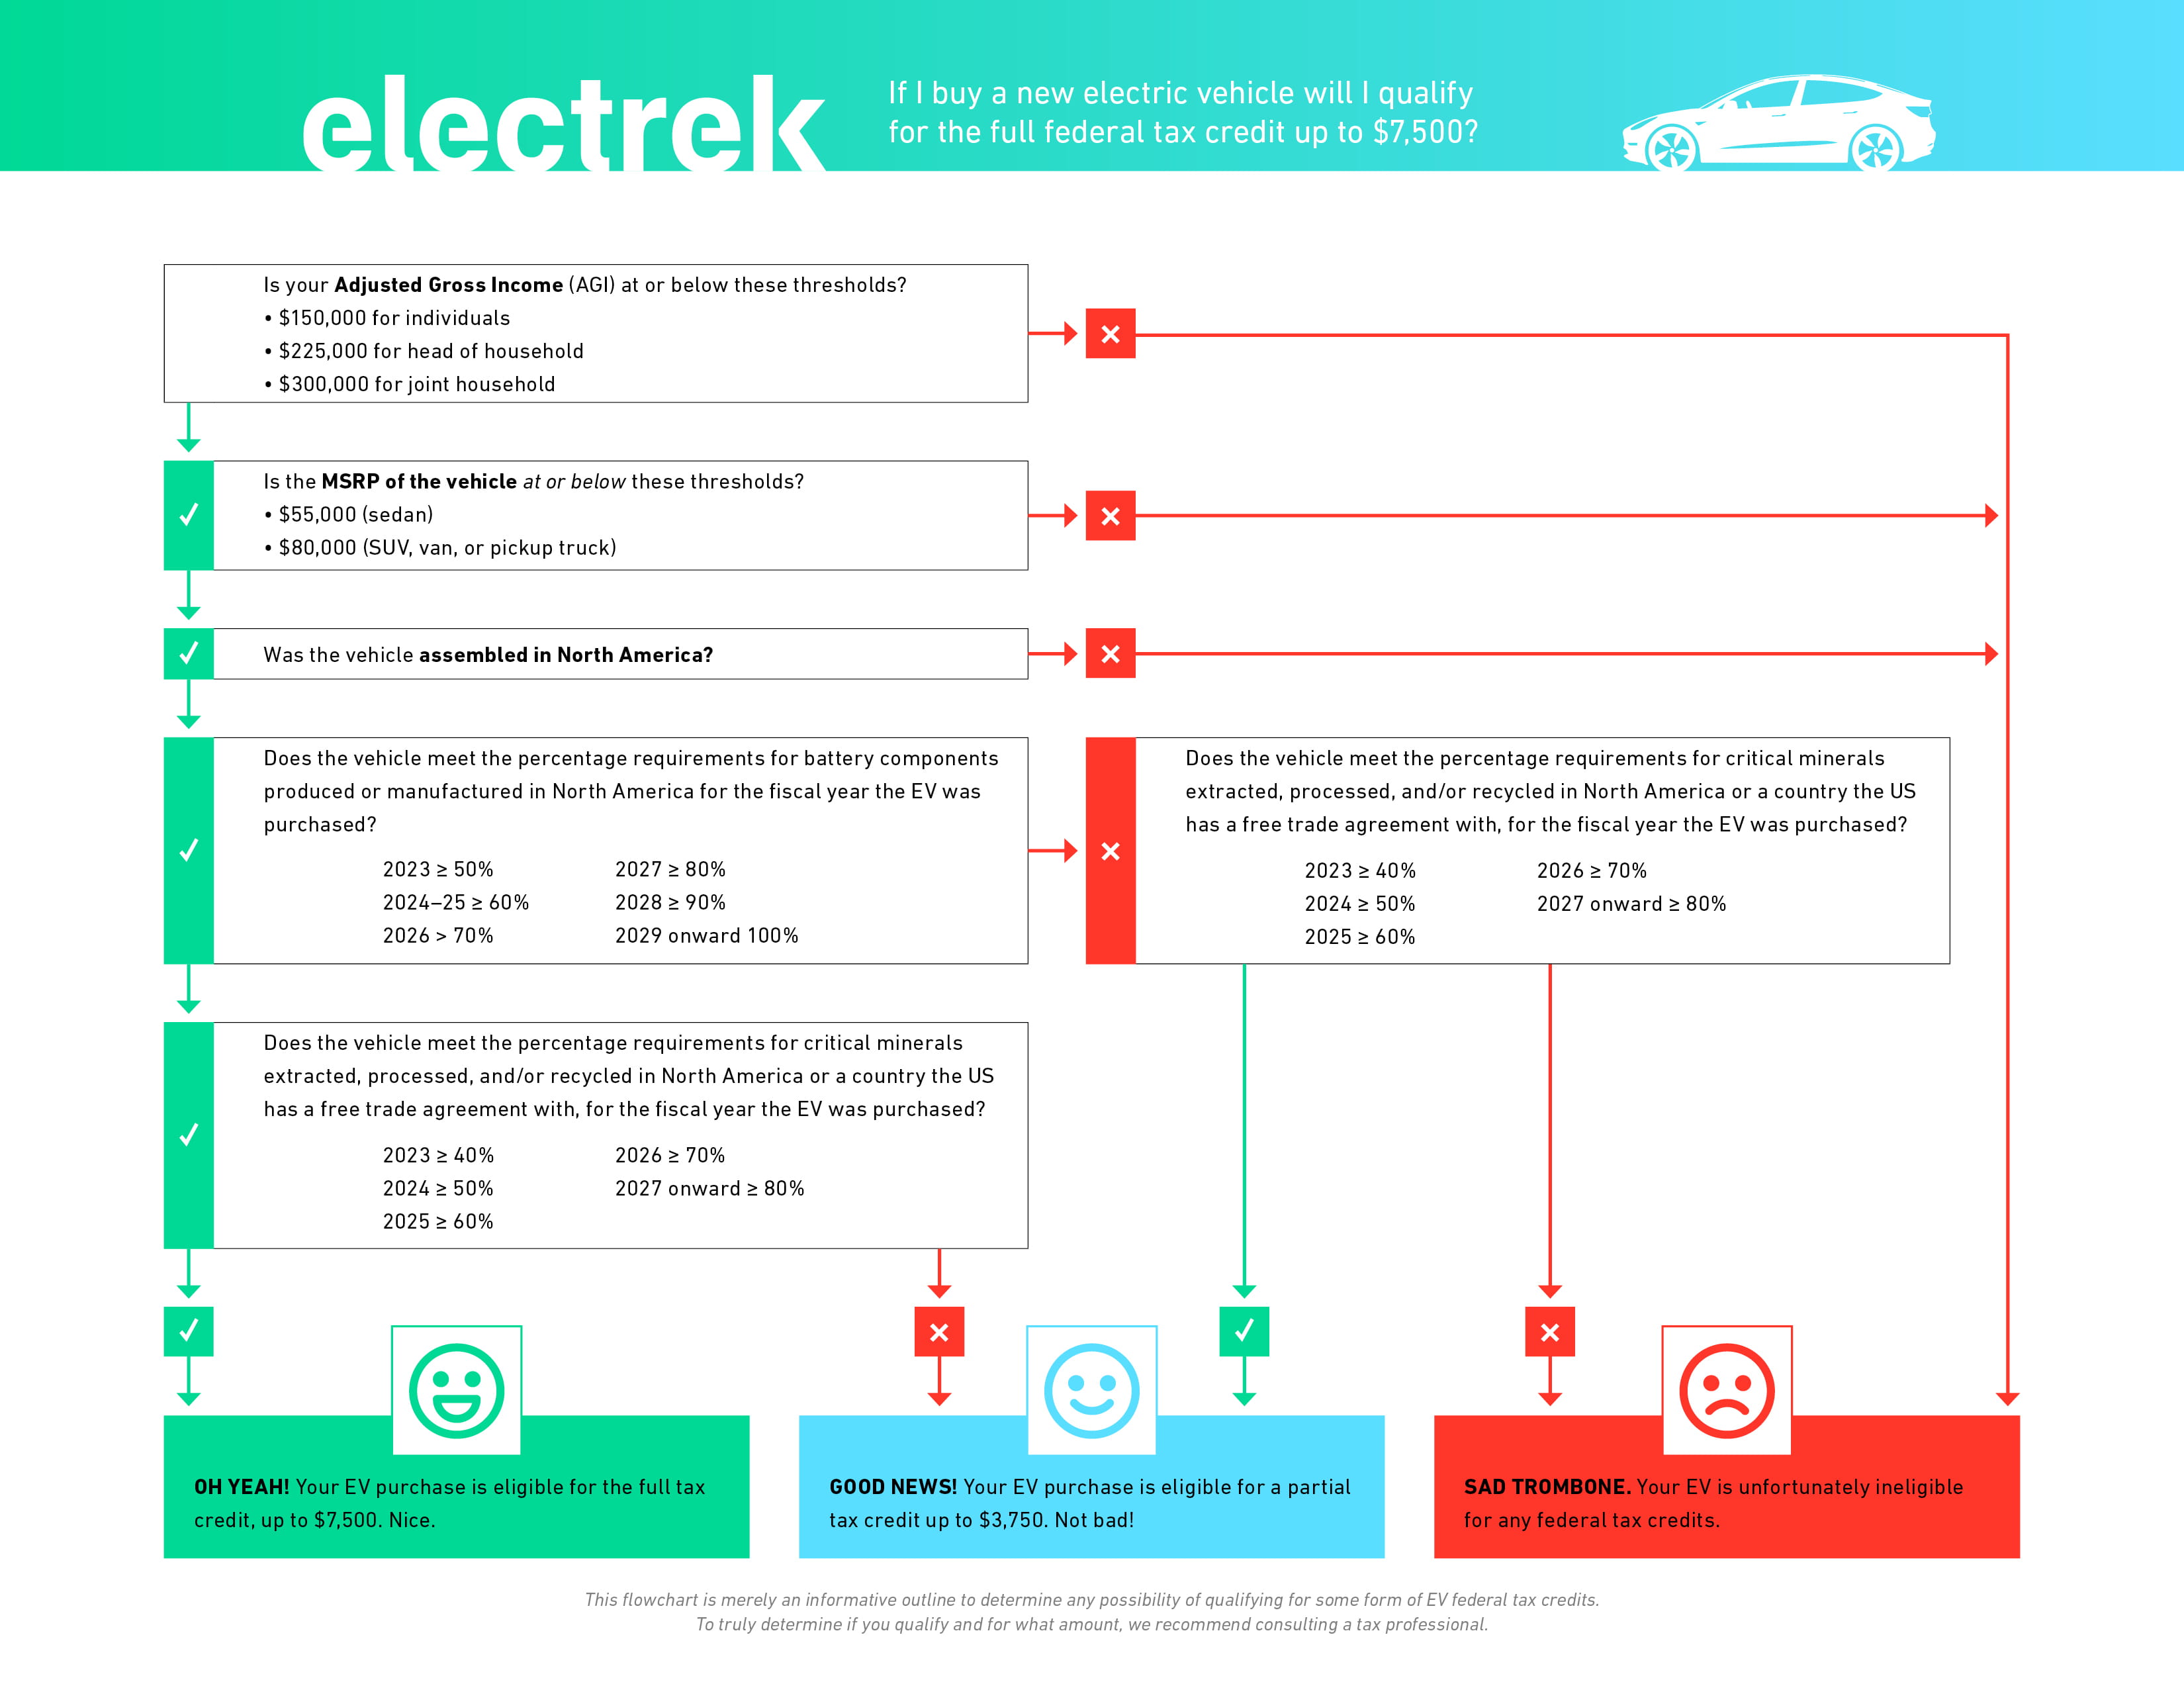 Everything you need to know about the IRS’s new EV tax credit guidance citydwellers